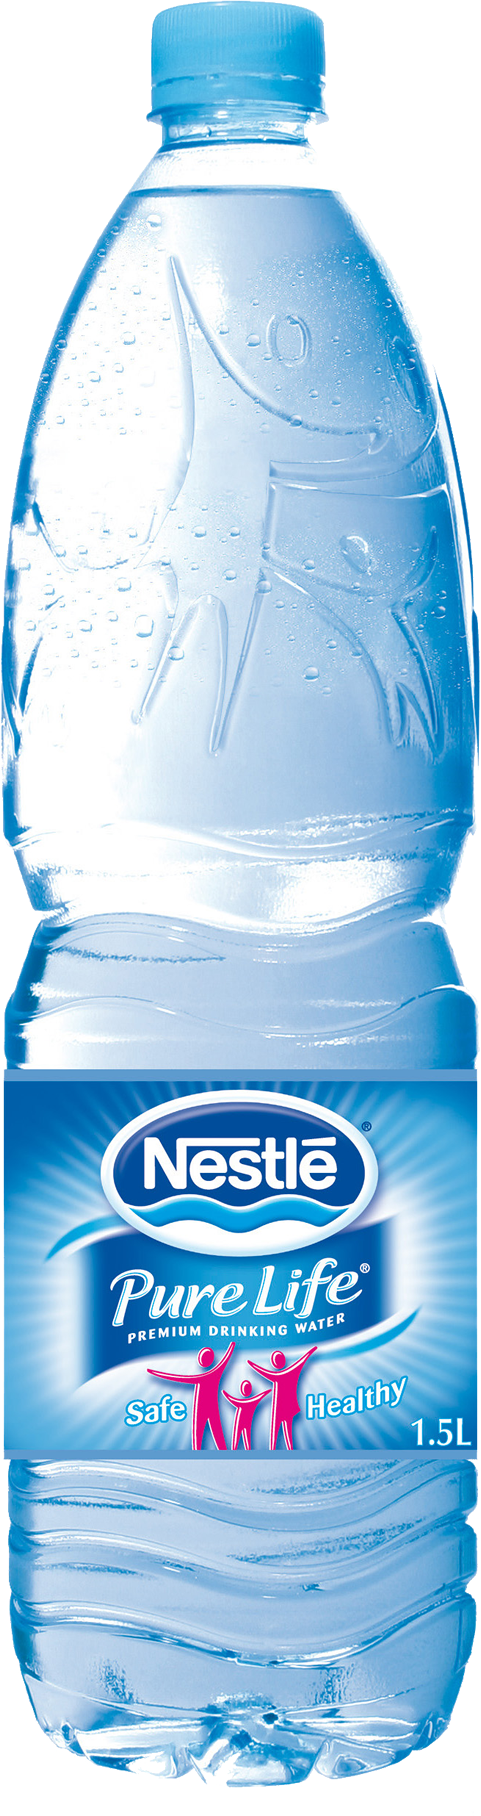 Water bottle PNG images free download.